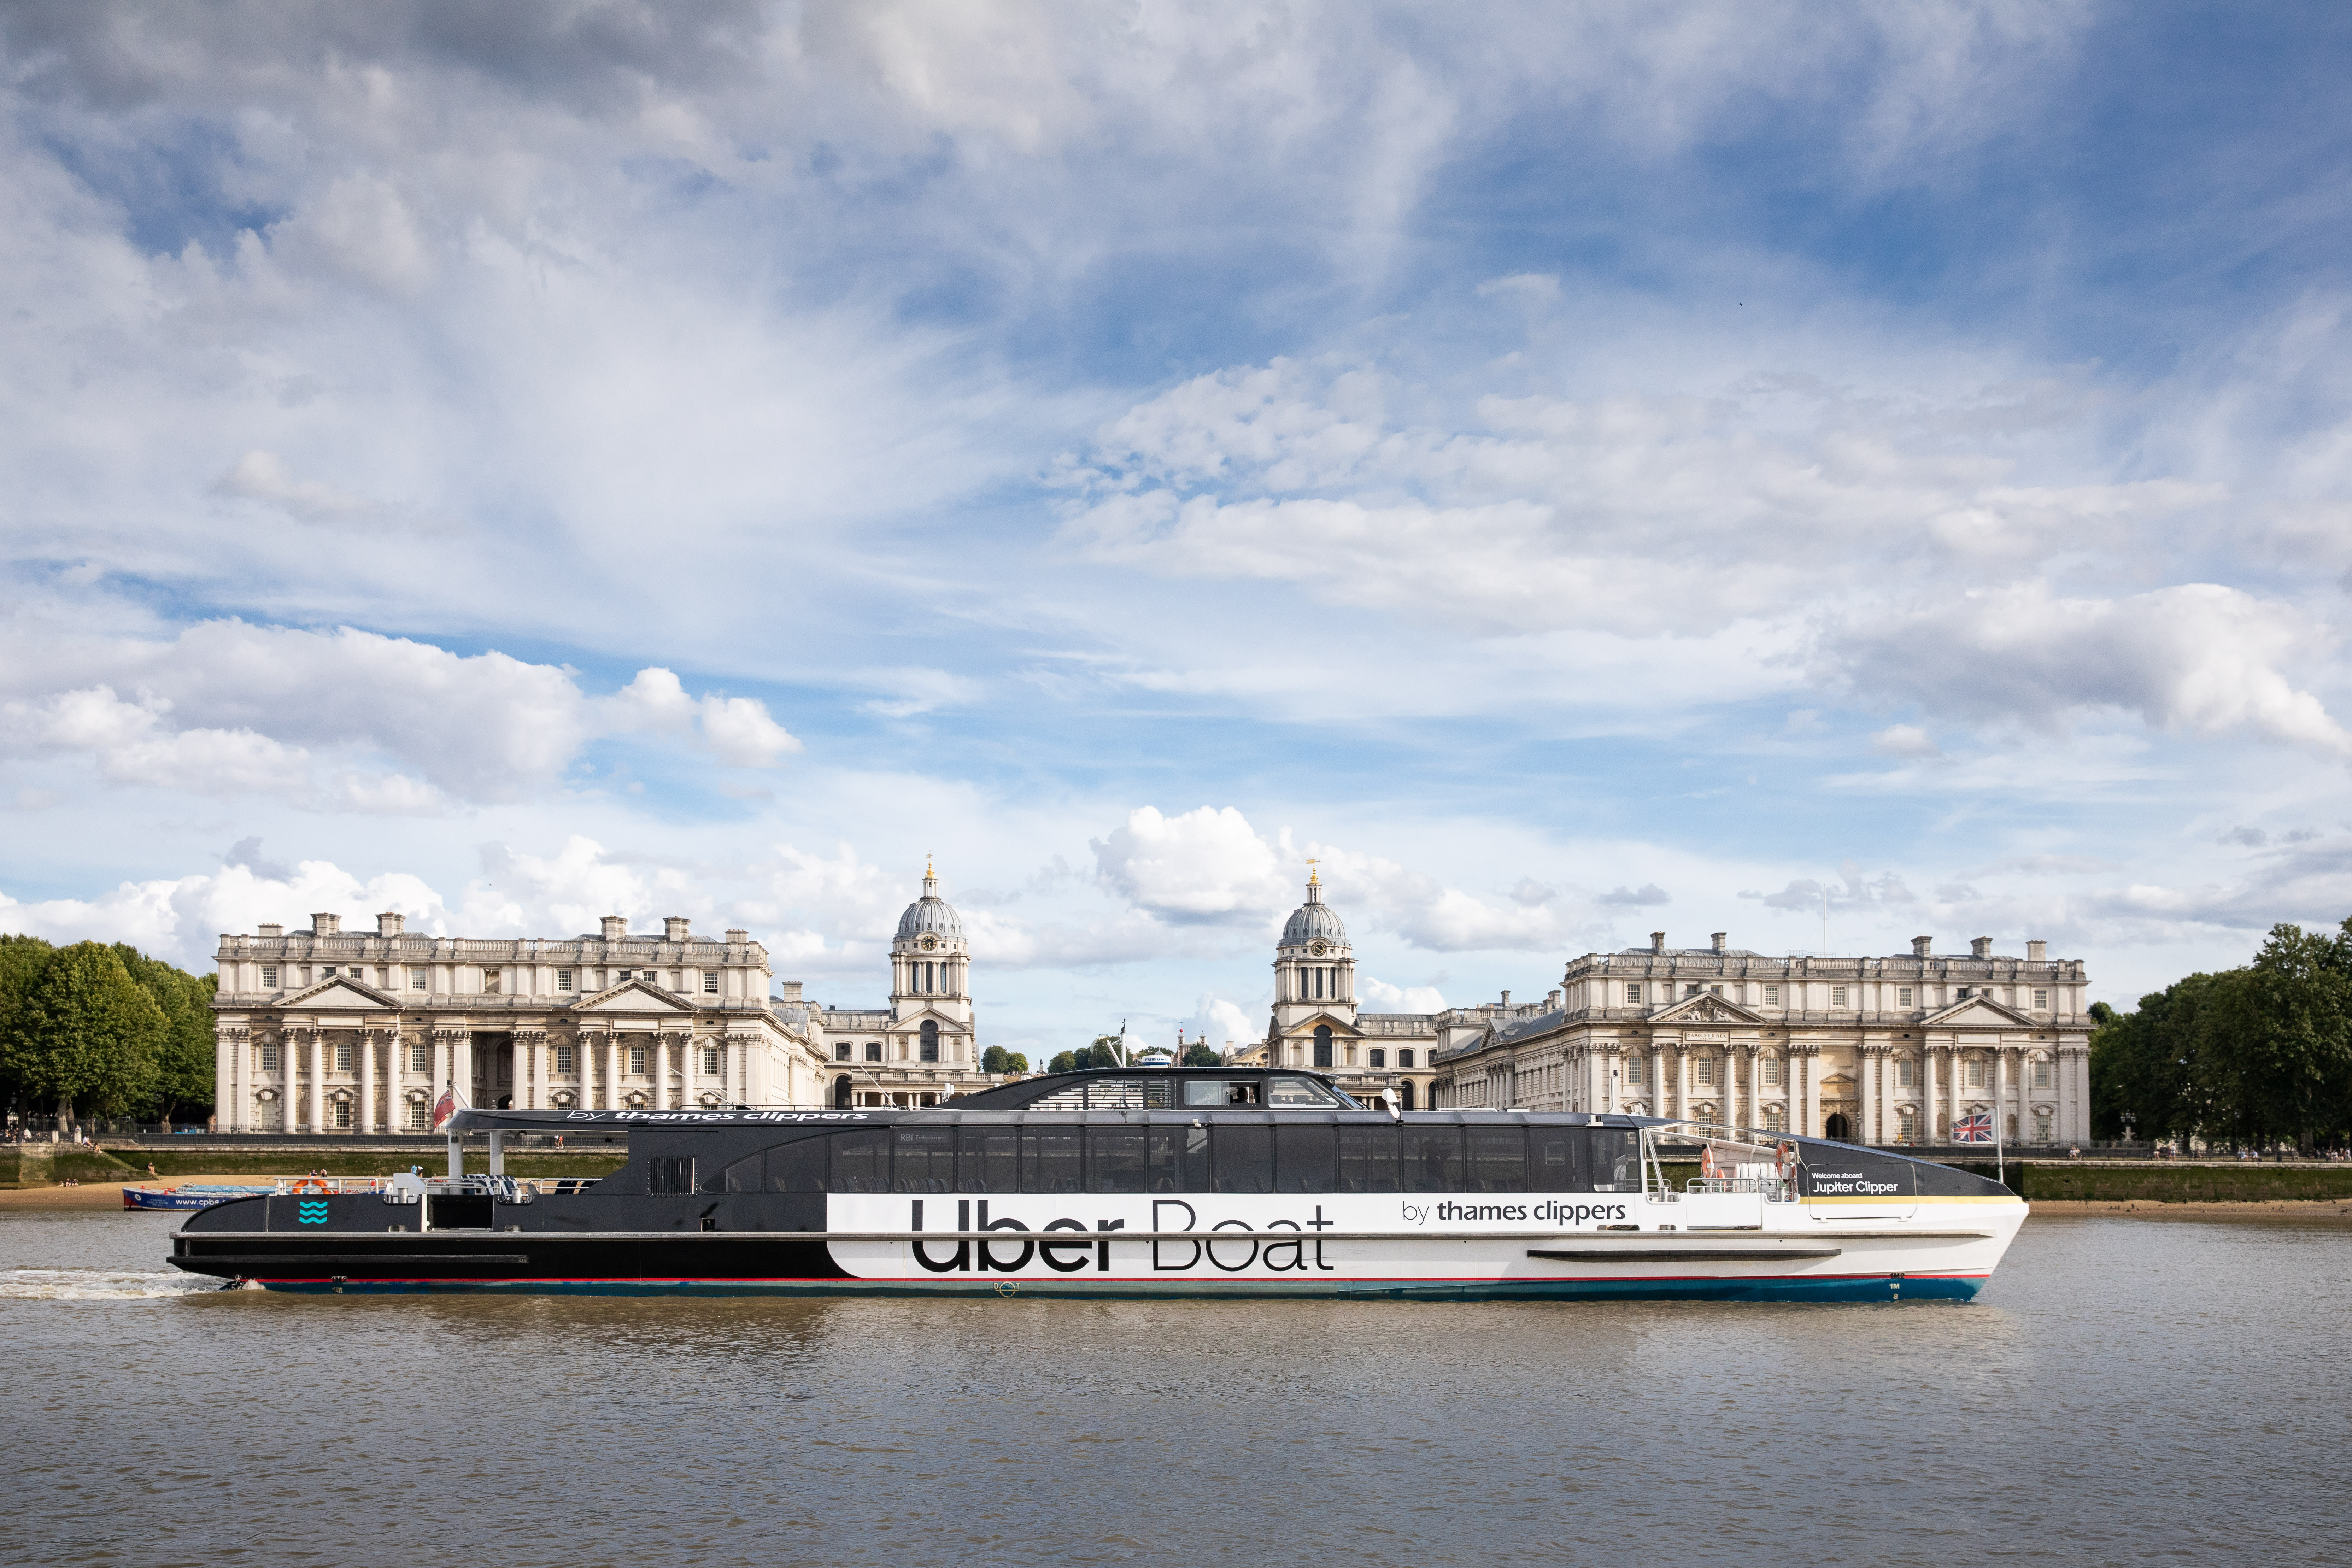 thames clipper prices